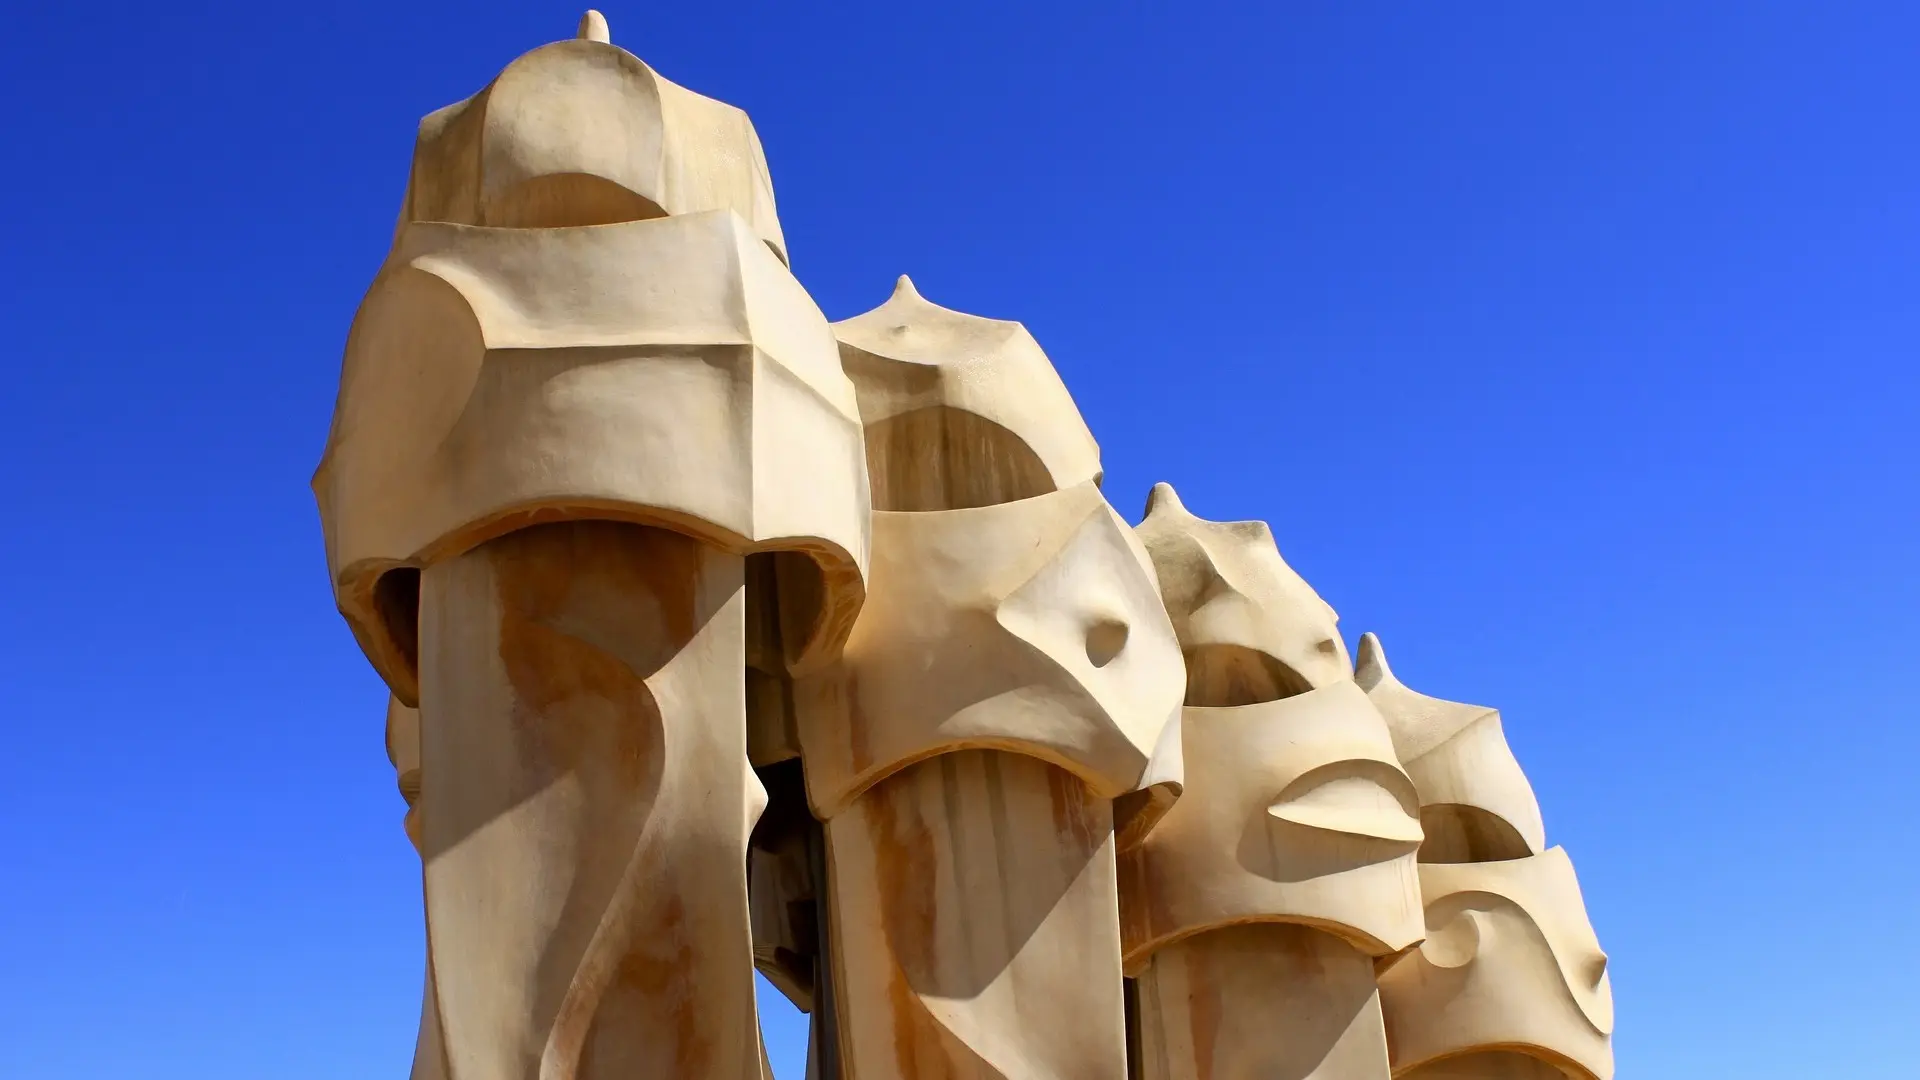 Four face statues in Barcelona with a sand colouring also known as Casa Mila.